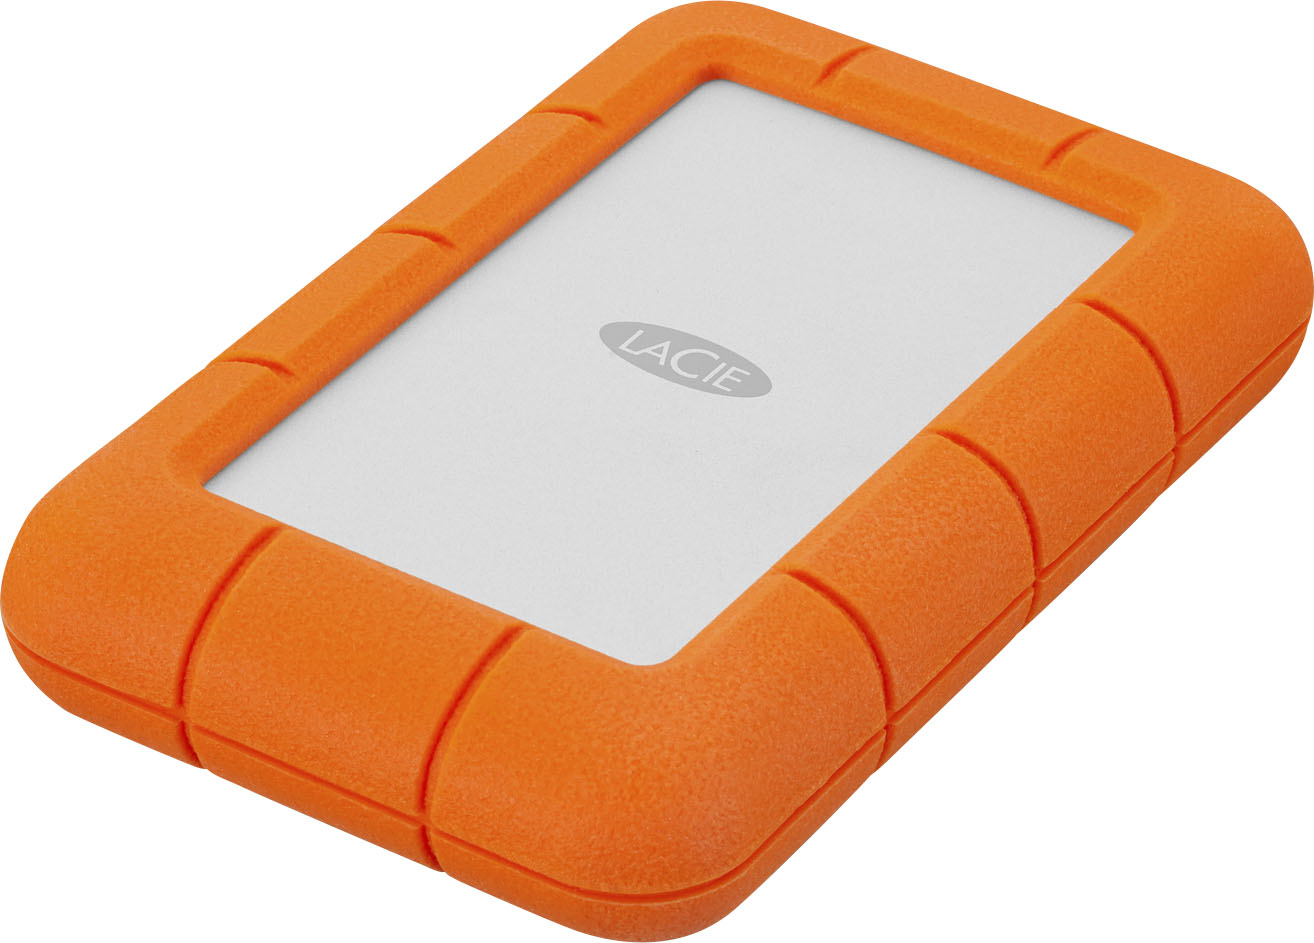 LaCie Rugged Mini External USB 3.0 Portable Hard with Rescue Data Recovery Services Orange/Silver - Best